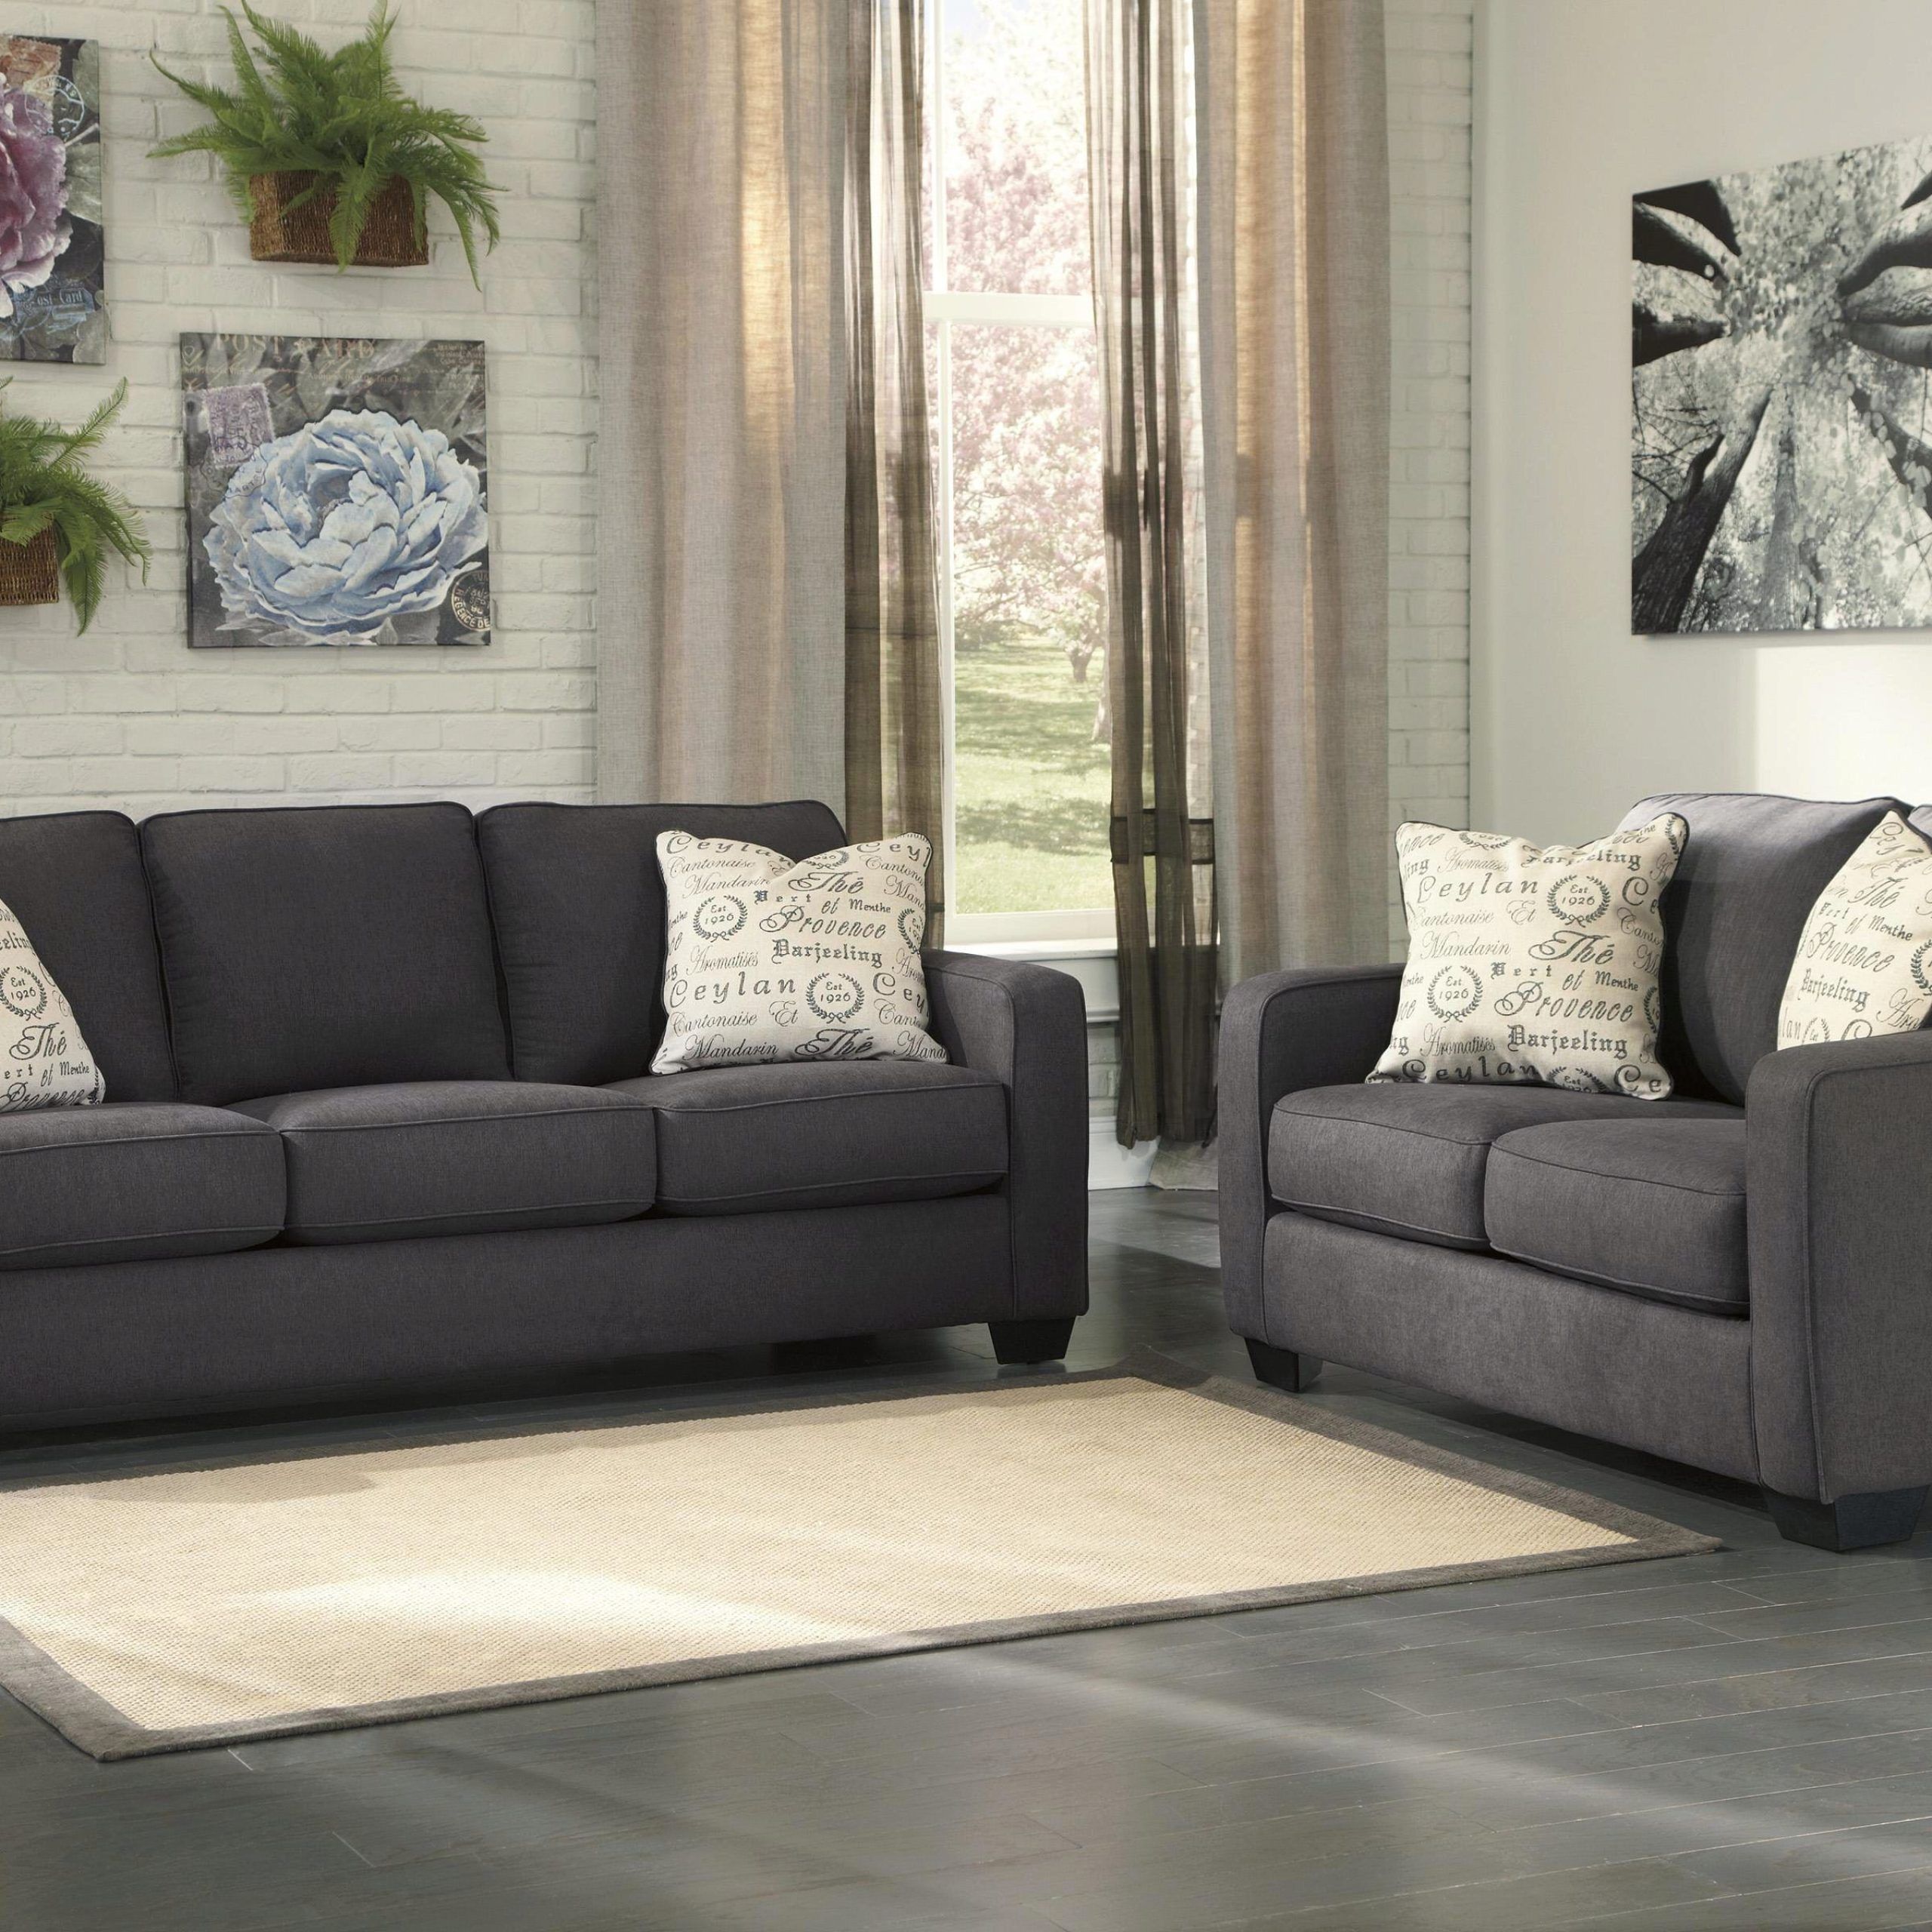 Charcoal Linen Fabric Upholstery Sofa & Loveseat Set 2pcs Casual Ashley Inside Light Charcoal Linen Sofas (Gallery 9 of 20)